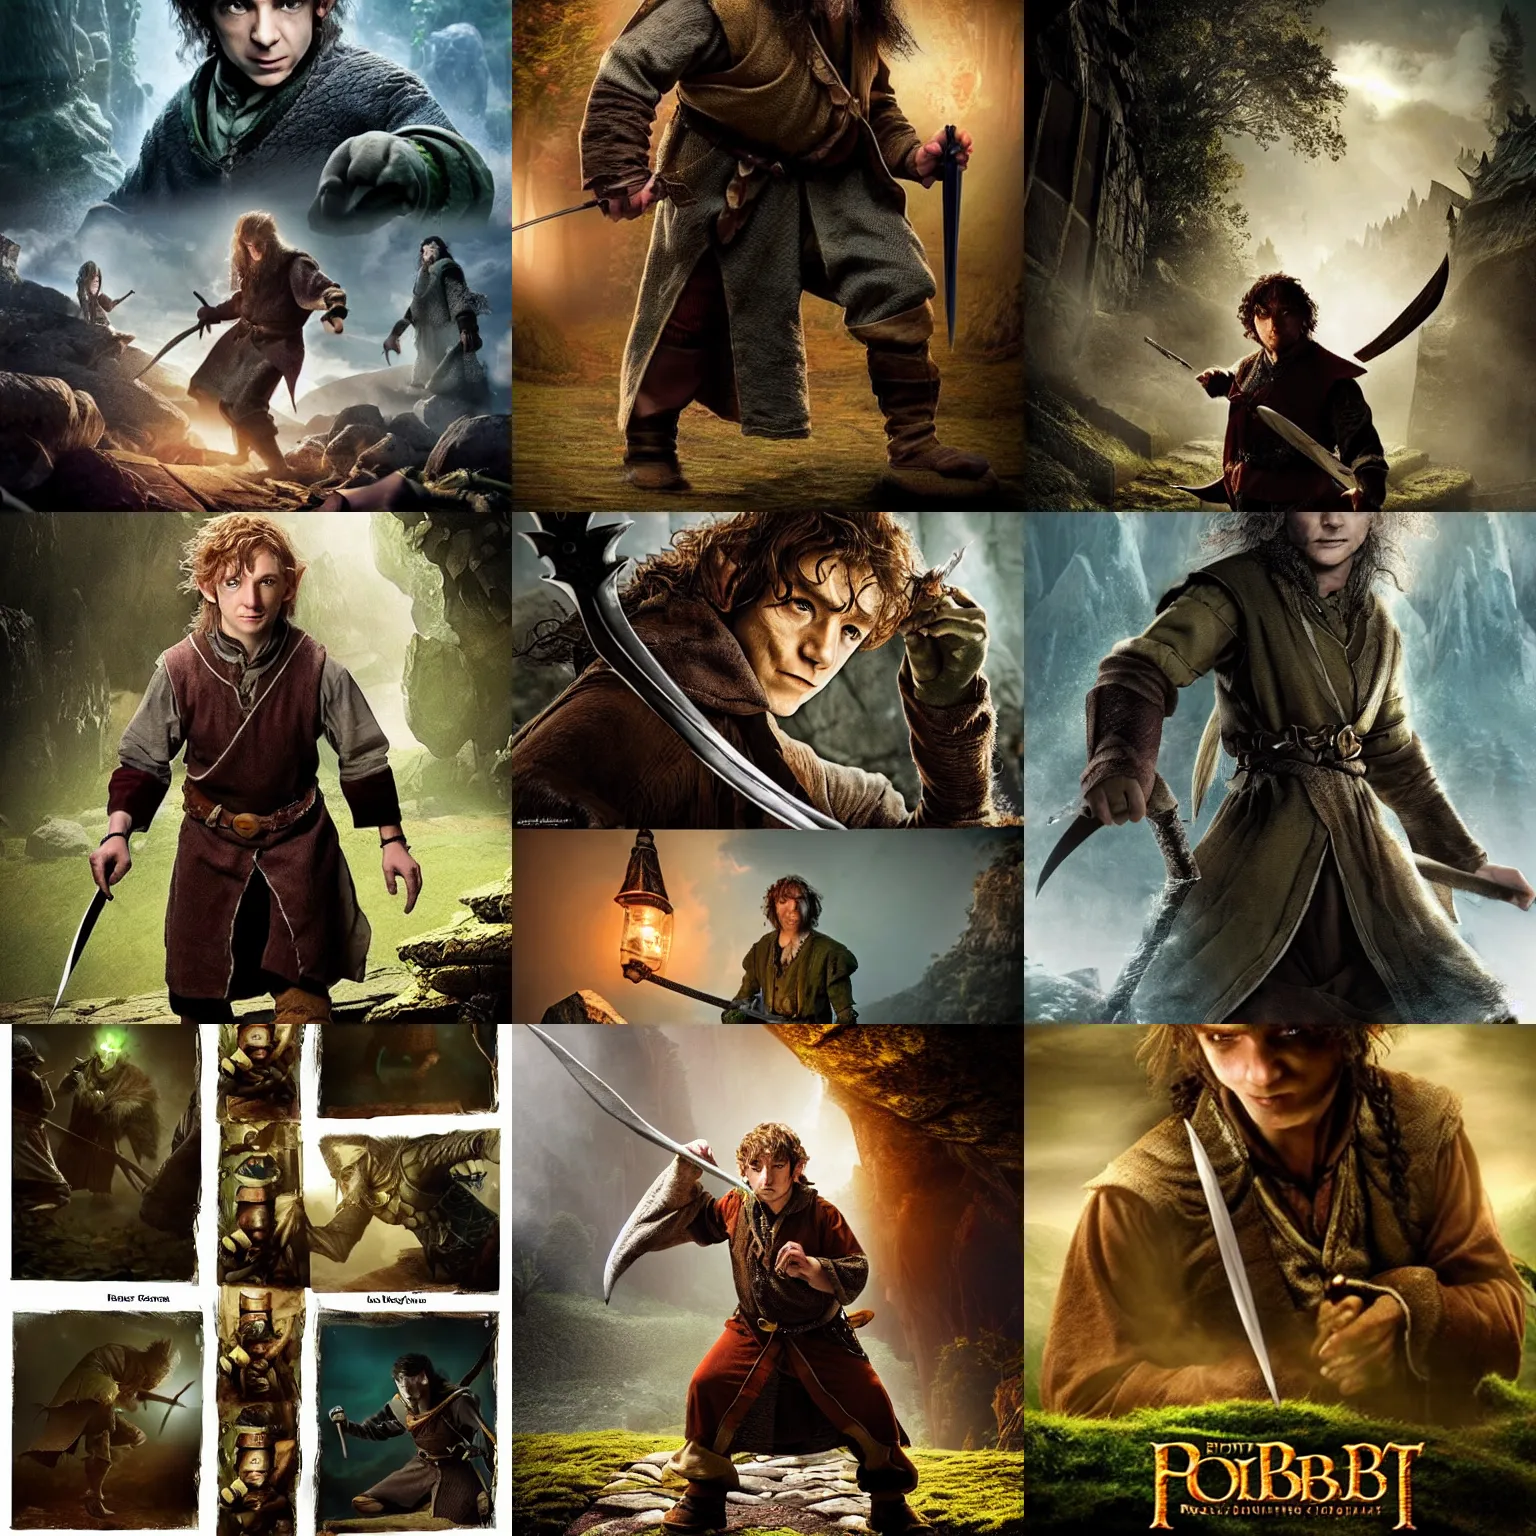 Lord Of The Rings Movie Frodo Drama Fantasy Painting Wall Art - POSTER 20x30